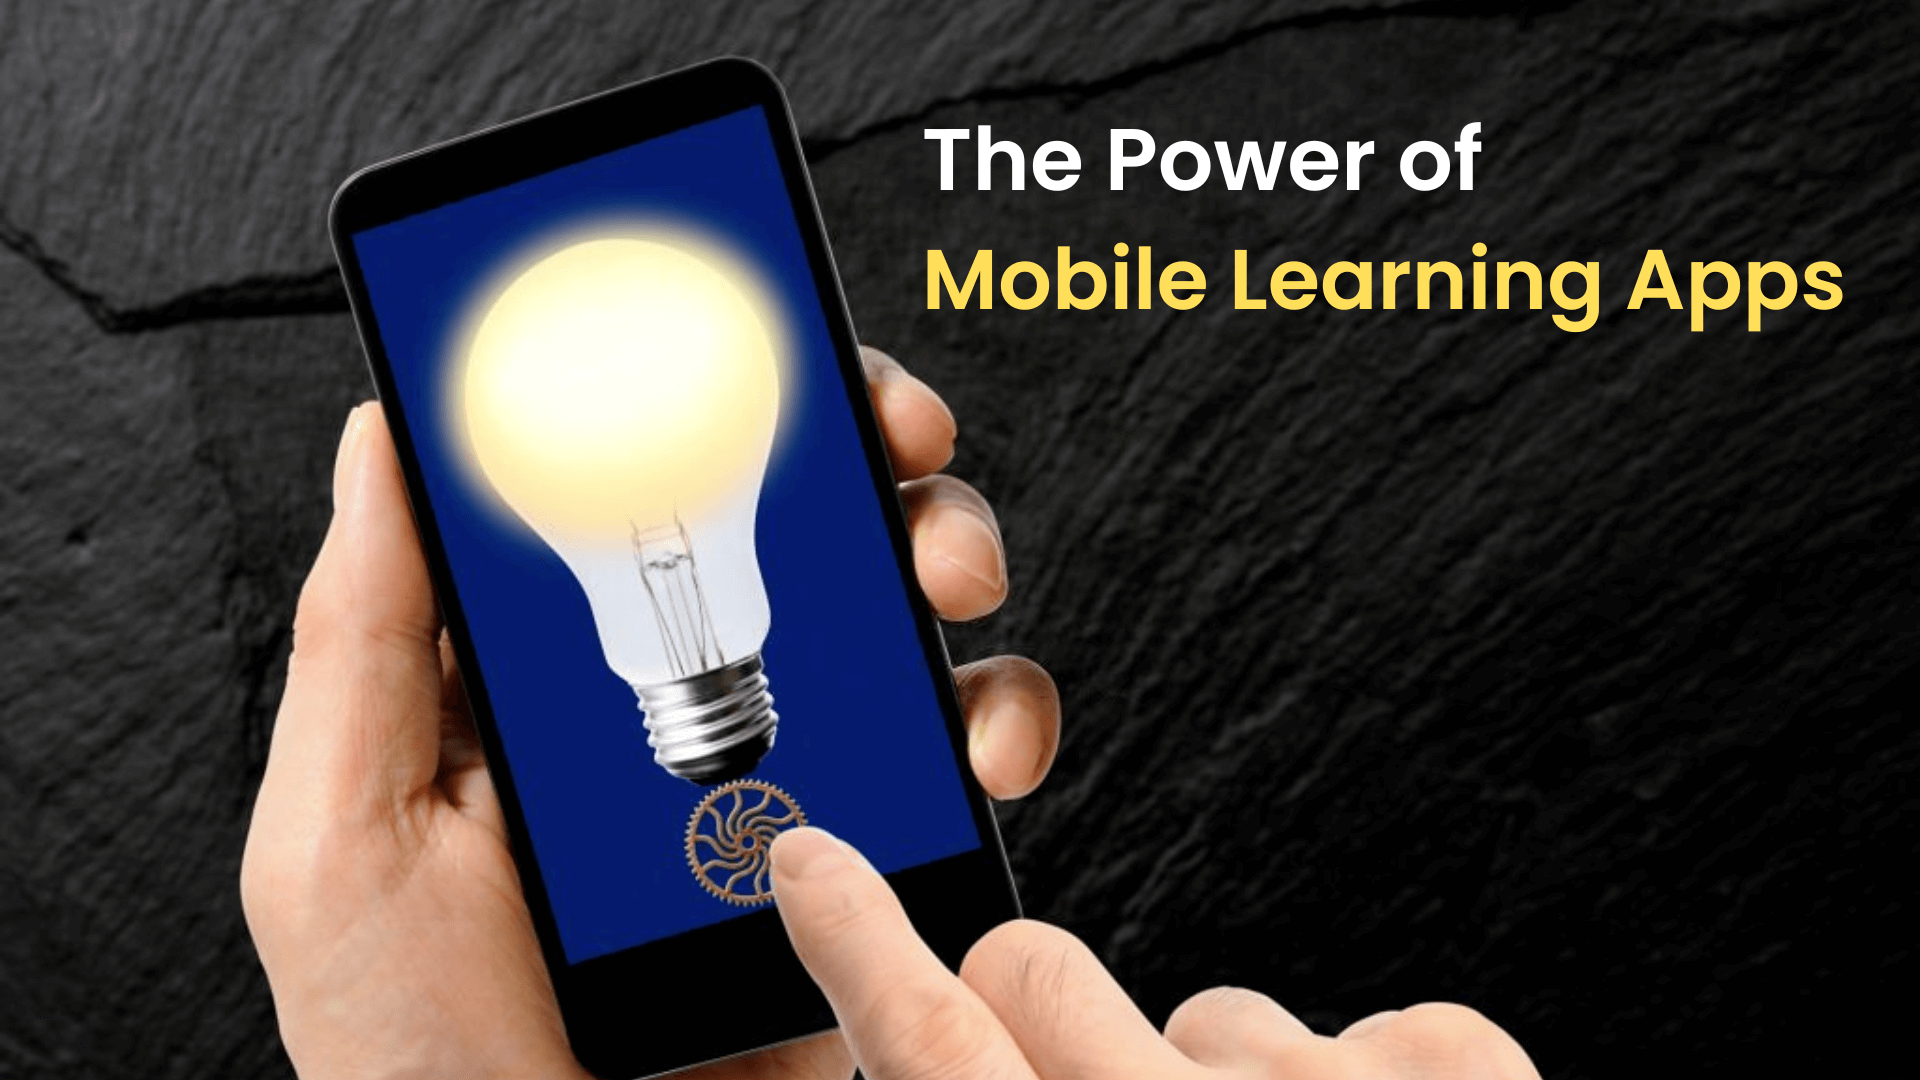 The Power of Mobile Learning Apps